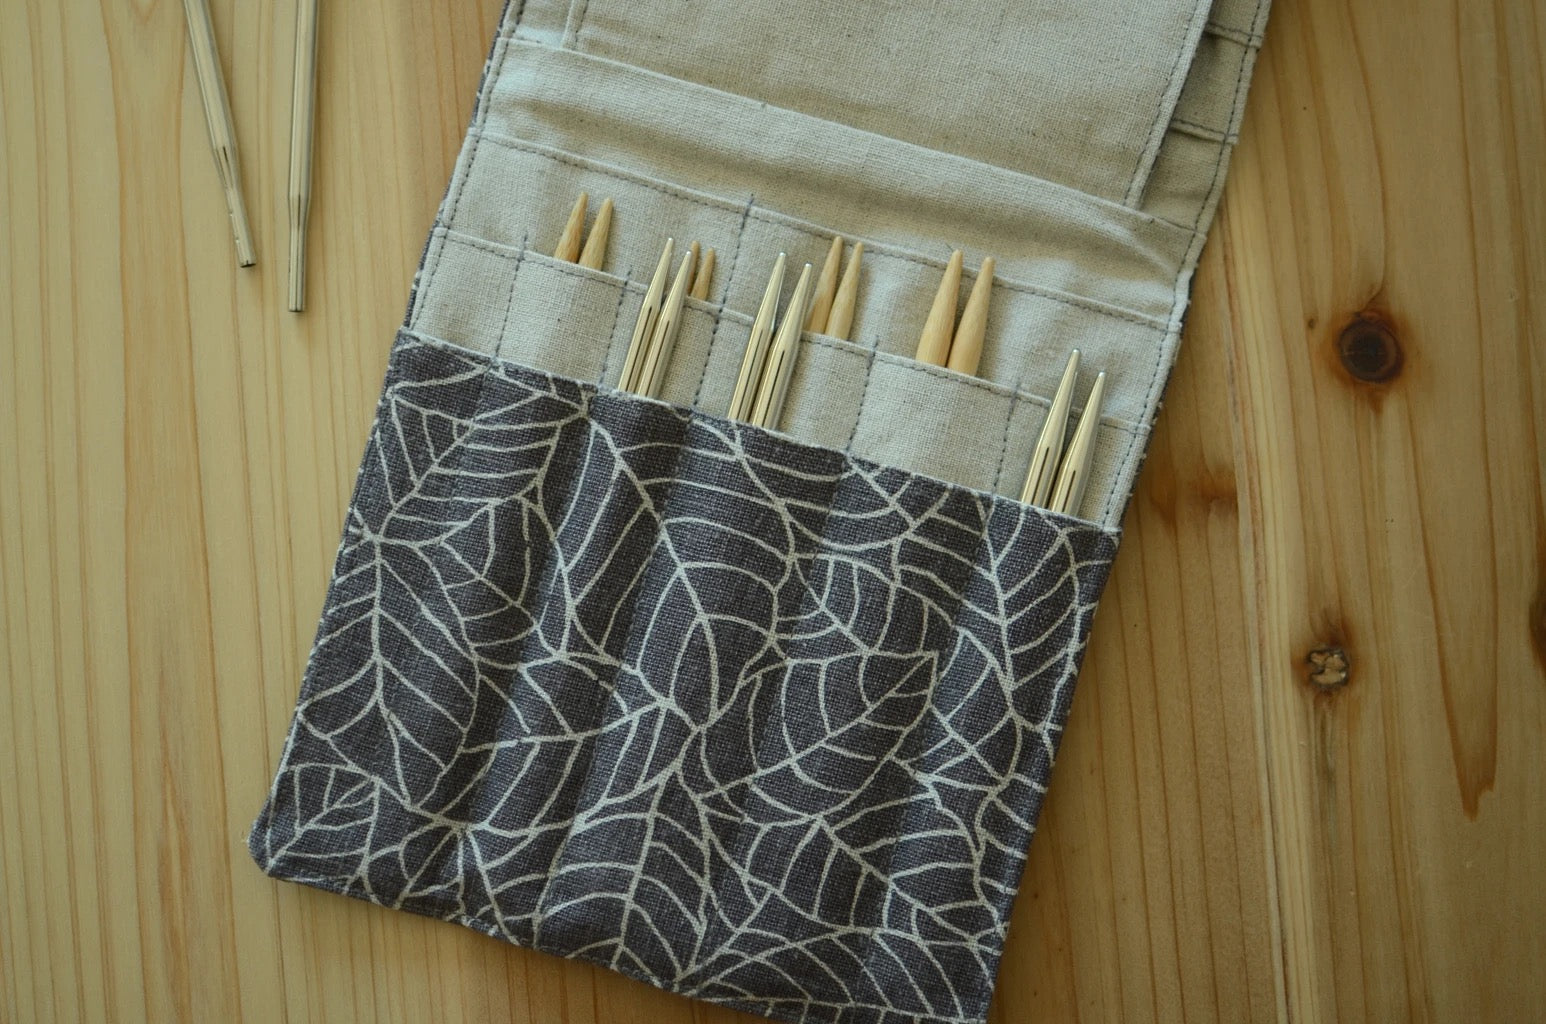 Sewing project for knitters: an interchangeable needle case.